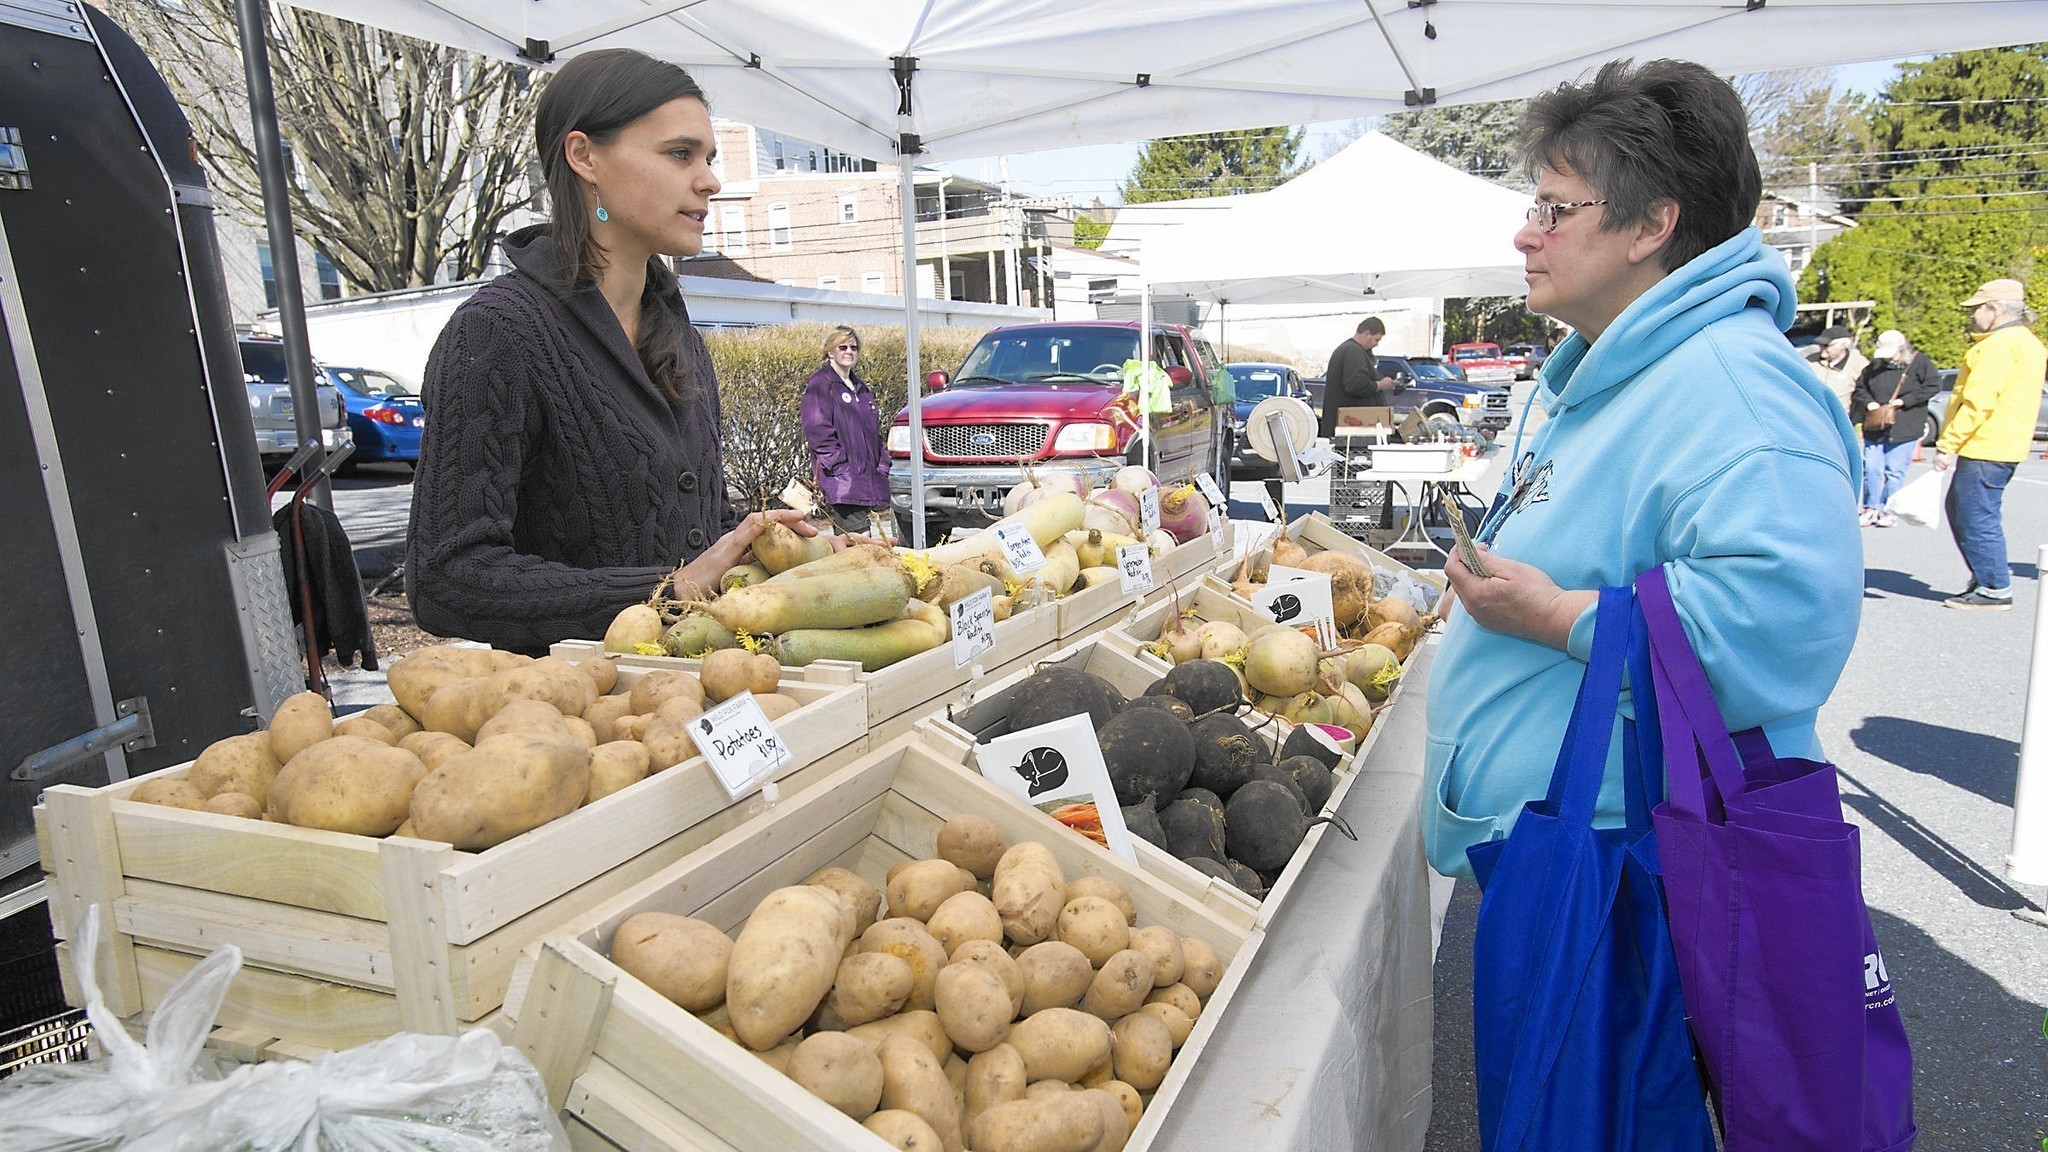 Friday night farmers market coming to downtown Allentown - The Morning Call